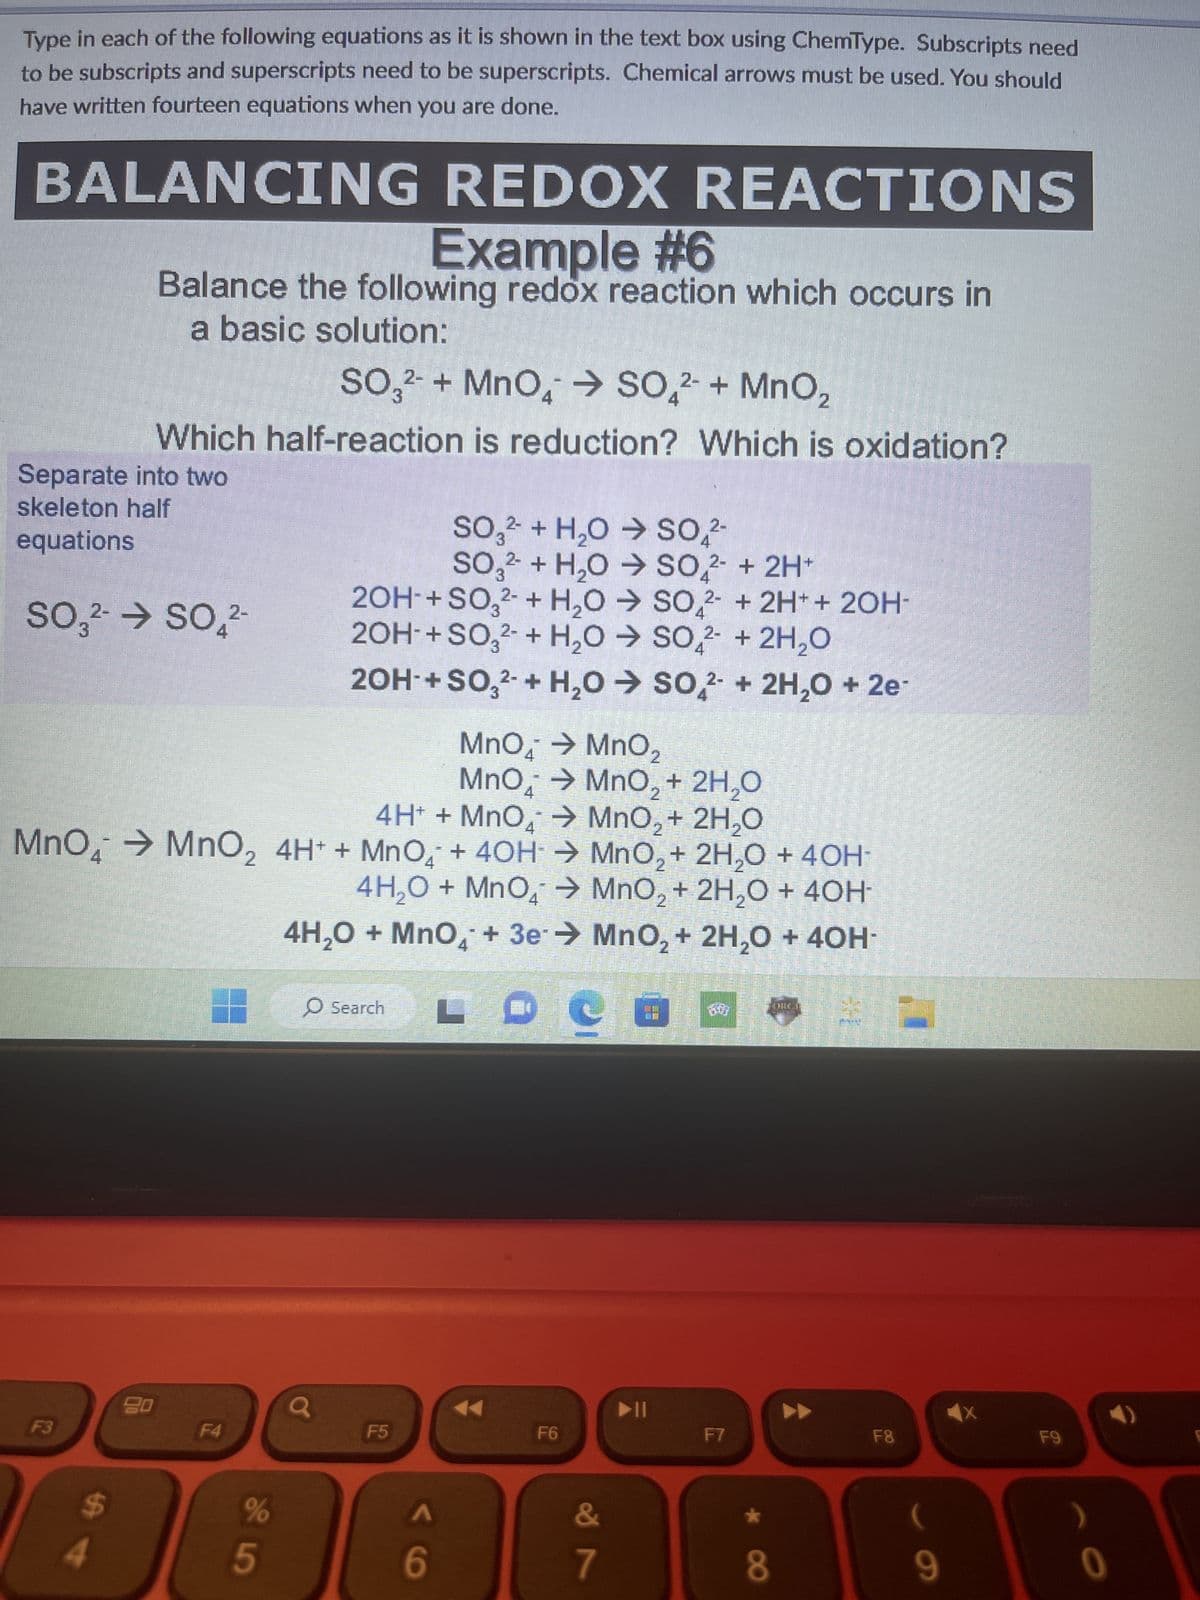 Type in each of the following equations as it is shown in the text box using ChemType. Subscripts need
to be subscripts and superscripts need to be superscripts. Chemical arrows must be used. You should
have written fourteen equations when you are done.
BALANCING REDOX REACTIONS
Example #6
Balance the following redox reaction which occurs in
a basic solution:
SO3²- + MnO4 → SO₂²- + MnO₂
Which half-reaction is reduction? Which is oxidation?
Separate into two
skeleton half
equations
SO3²- → SO₂2-
F3
MnO → MnO₂
MnO → MnO₂ + 2H₂O
4
4H+ + MnO₂ → MnO₂ + 2H₂O
MnO4 → MnO₂ 4H+ + MnO + 4OH → MnO₂ + 2H₂O + 40H-
4H₂O + MnO₂ →
MnO₂ + 2H₂O + 40H-
MnO₂ + 2H₂O + 40H-
4
20
F4
%
5
2OH- + SO3²- + H₂O → SO2 + 2H+ + 2OH-
2OH- + SO3²- + H₂O → SO2 + 2H₂O
20H-+SO3²- + H₂O → SO2 + 2H₂O + 2e-
4H₂O + MnO4 + 3e
21
O Search
SO3² + H₂O → SO₂²-
2-
SO3 + H₂O → SO2 + 2H+
F5
A
6
F6
&
7
▶ ||
F7
★
8
WHICLE
F8
9
F9
0